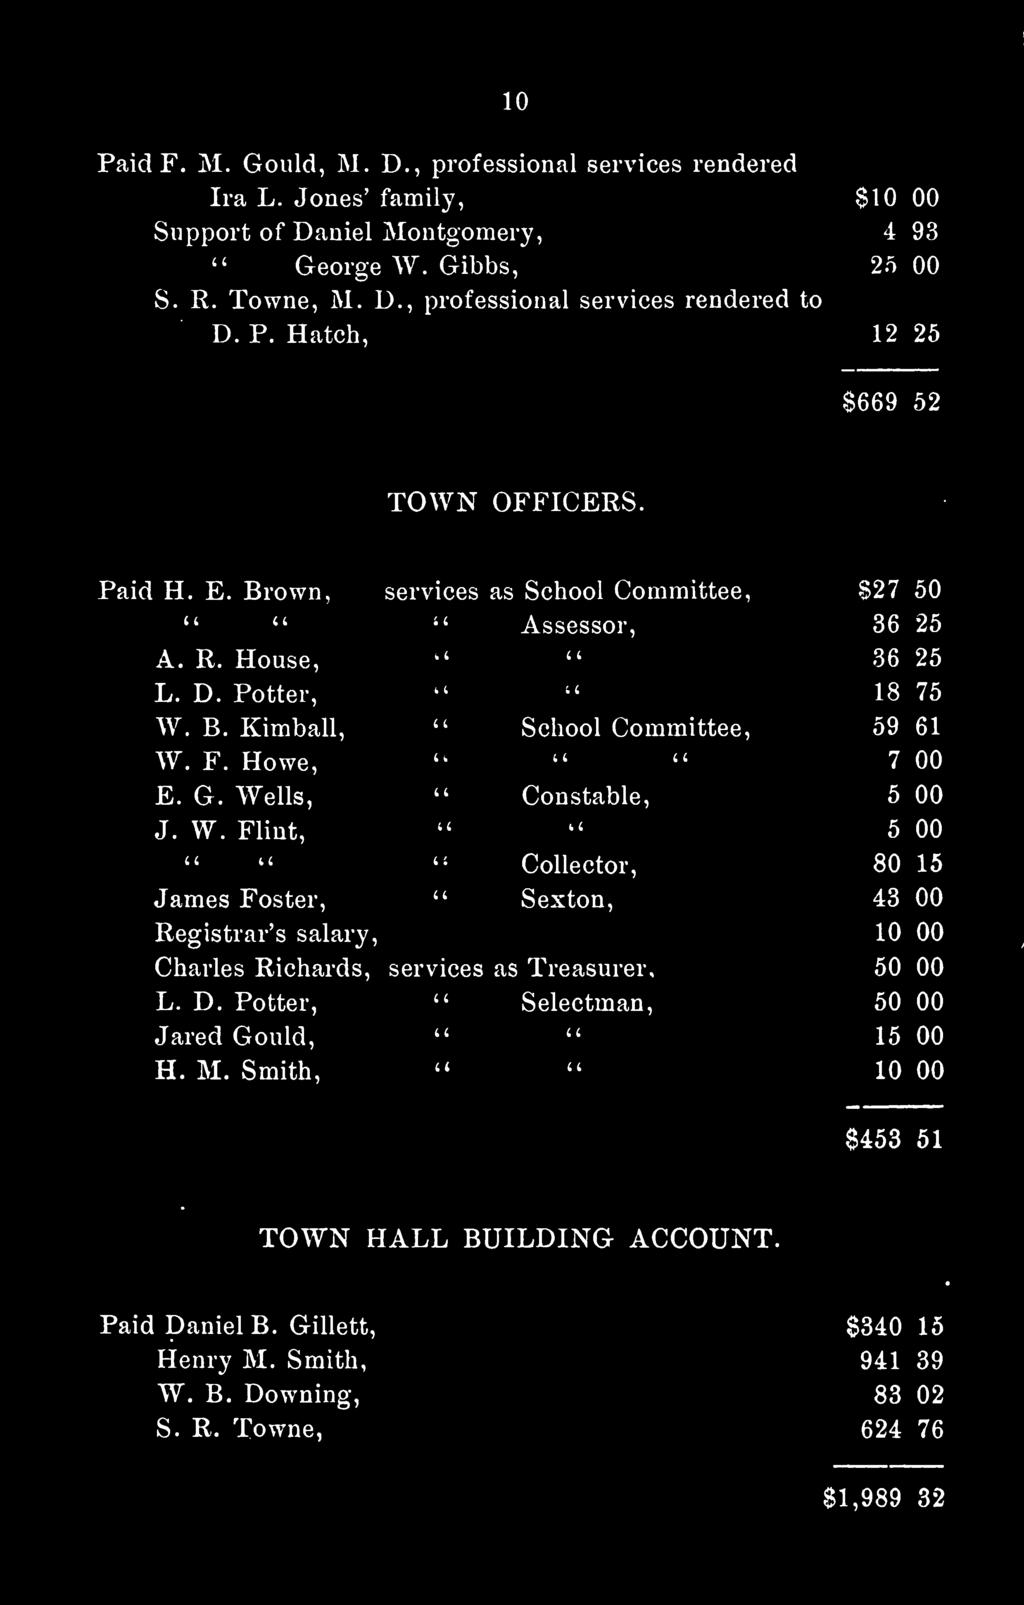 B. Kimball, W. F. Howe, E. G. Wells, J. W. Flint, James Foster, " Registrar's salary, Charles Richards, services as School Committee, Assessor, School Committee, Constable, Collector, Sexton, services as Treasurer, L.